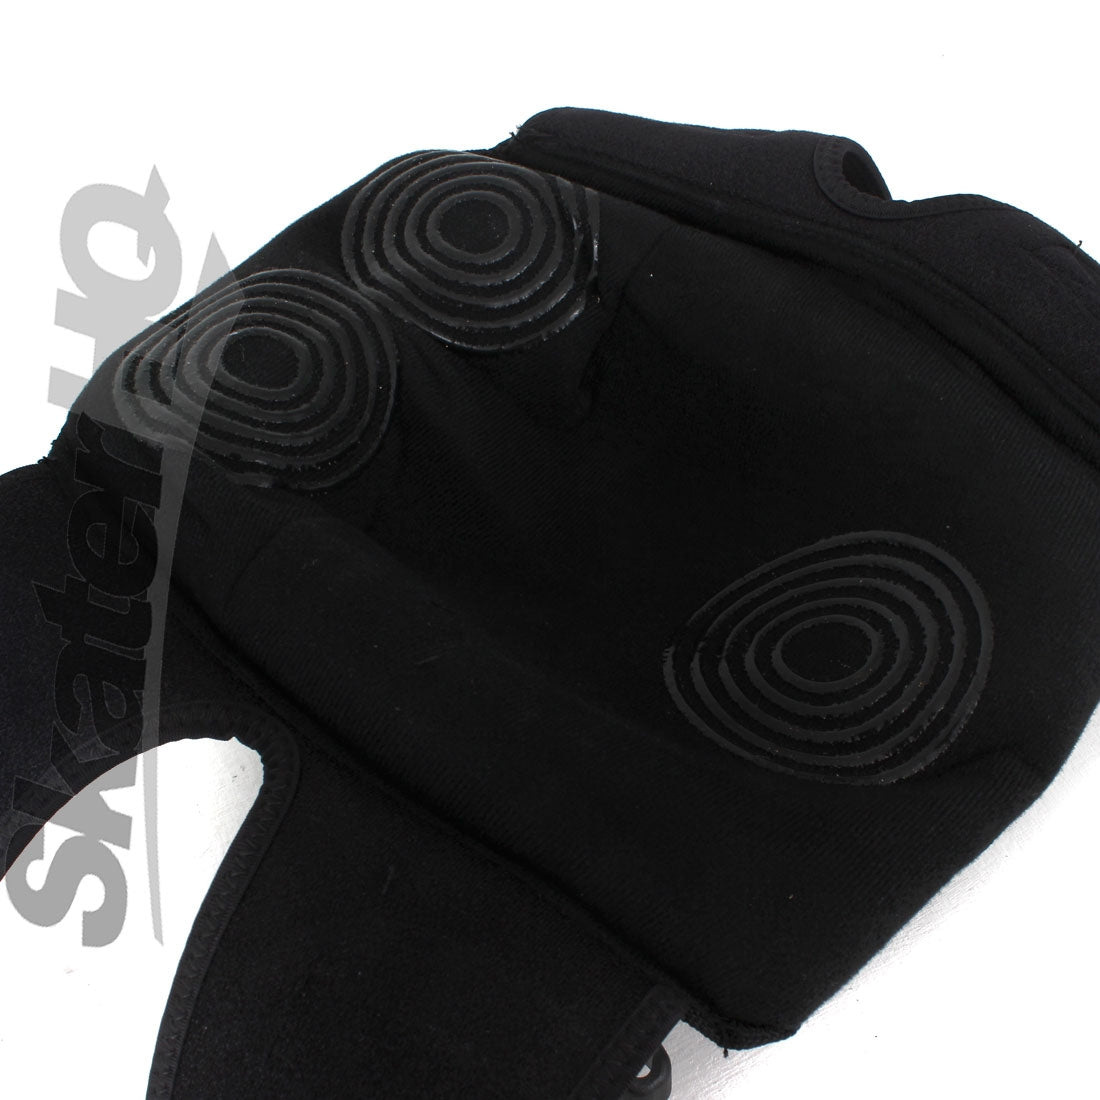 TSG Force V Kneepads - Large Protective Gear